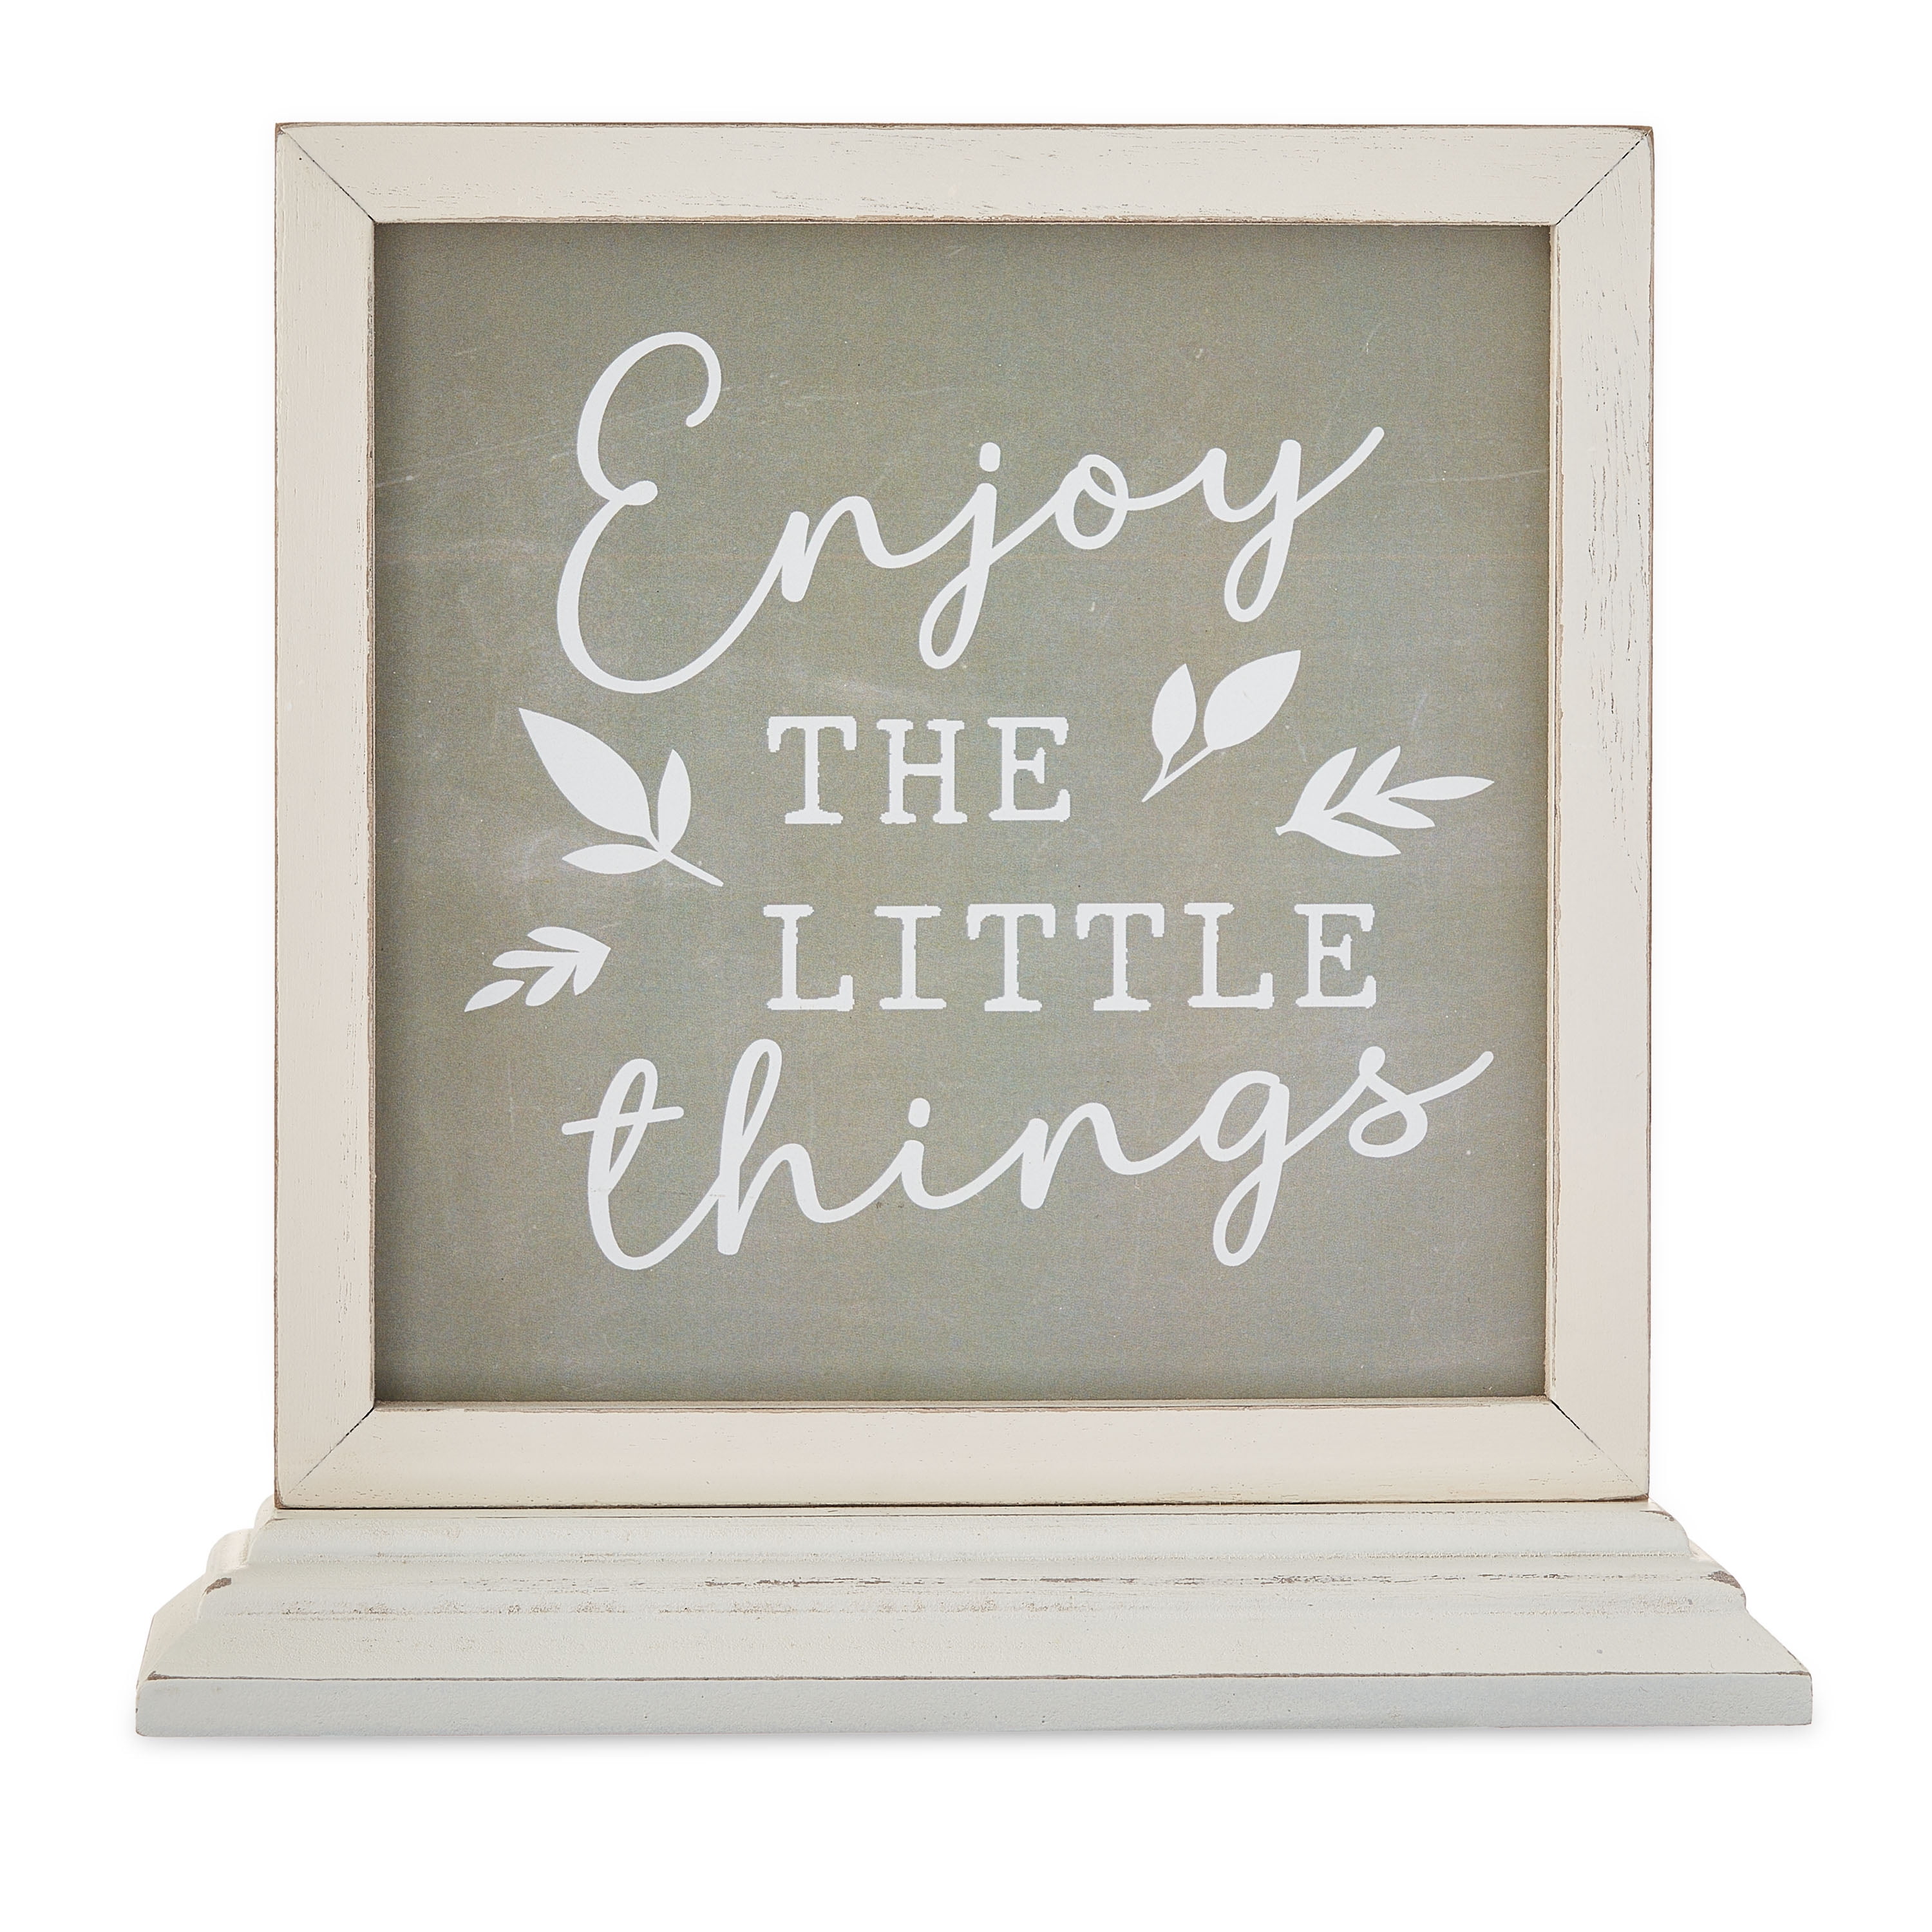 Way To Celebrate Harvest Enjoy the Little Things Tabletop Decor, 8"